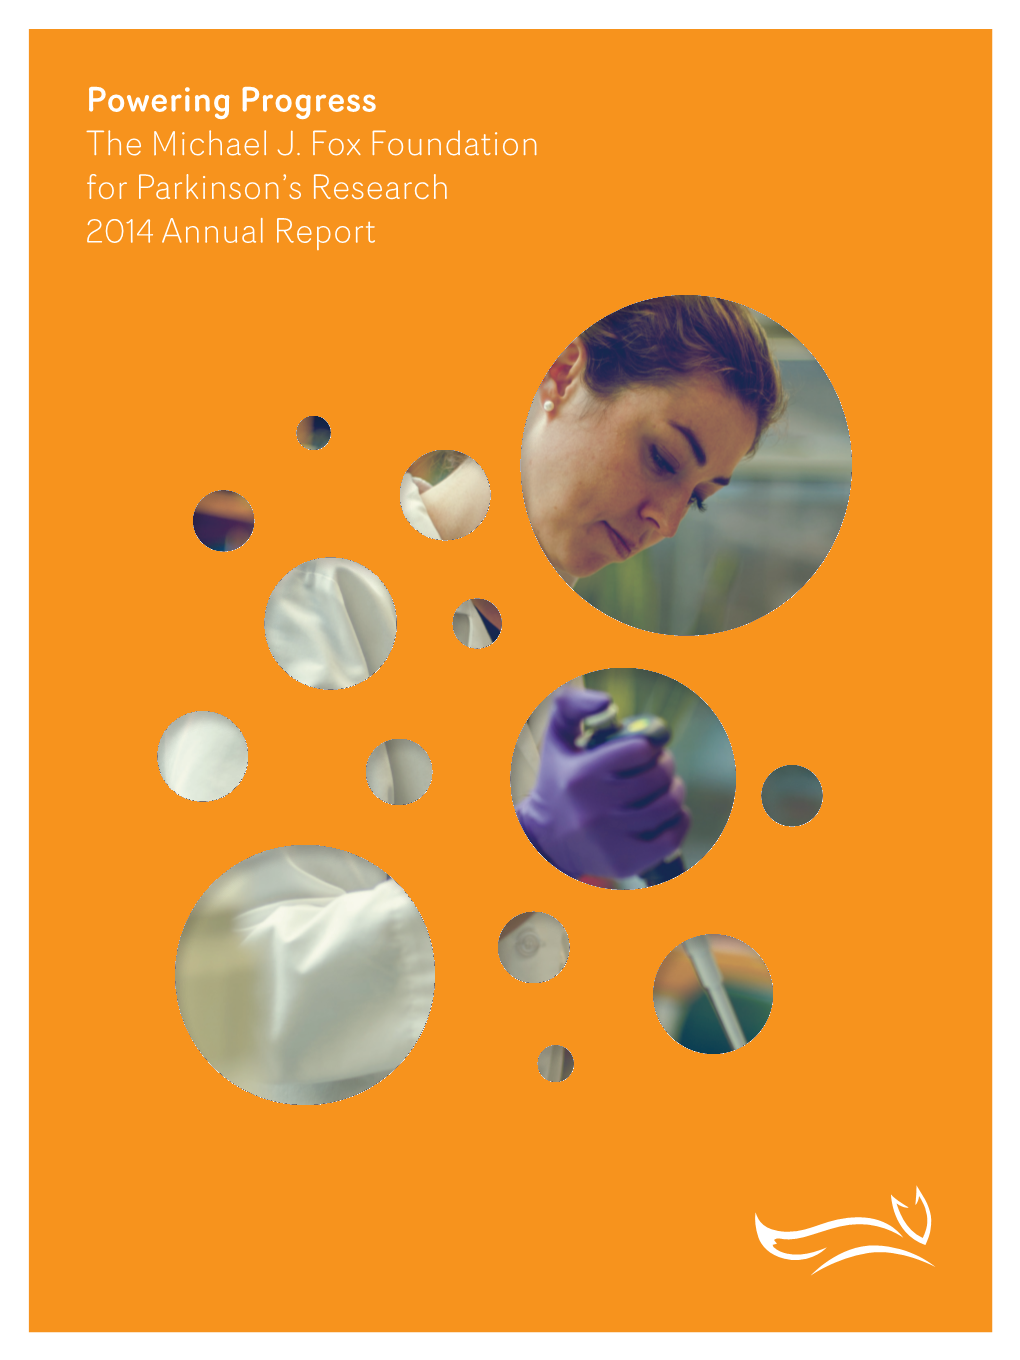 Powering Progress the Michael J. Fox Foundation for Parkinson's Research 2014 Annual Report